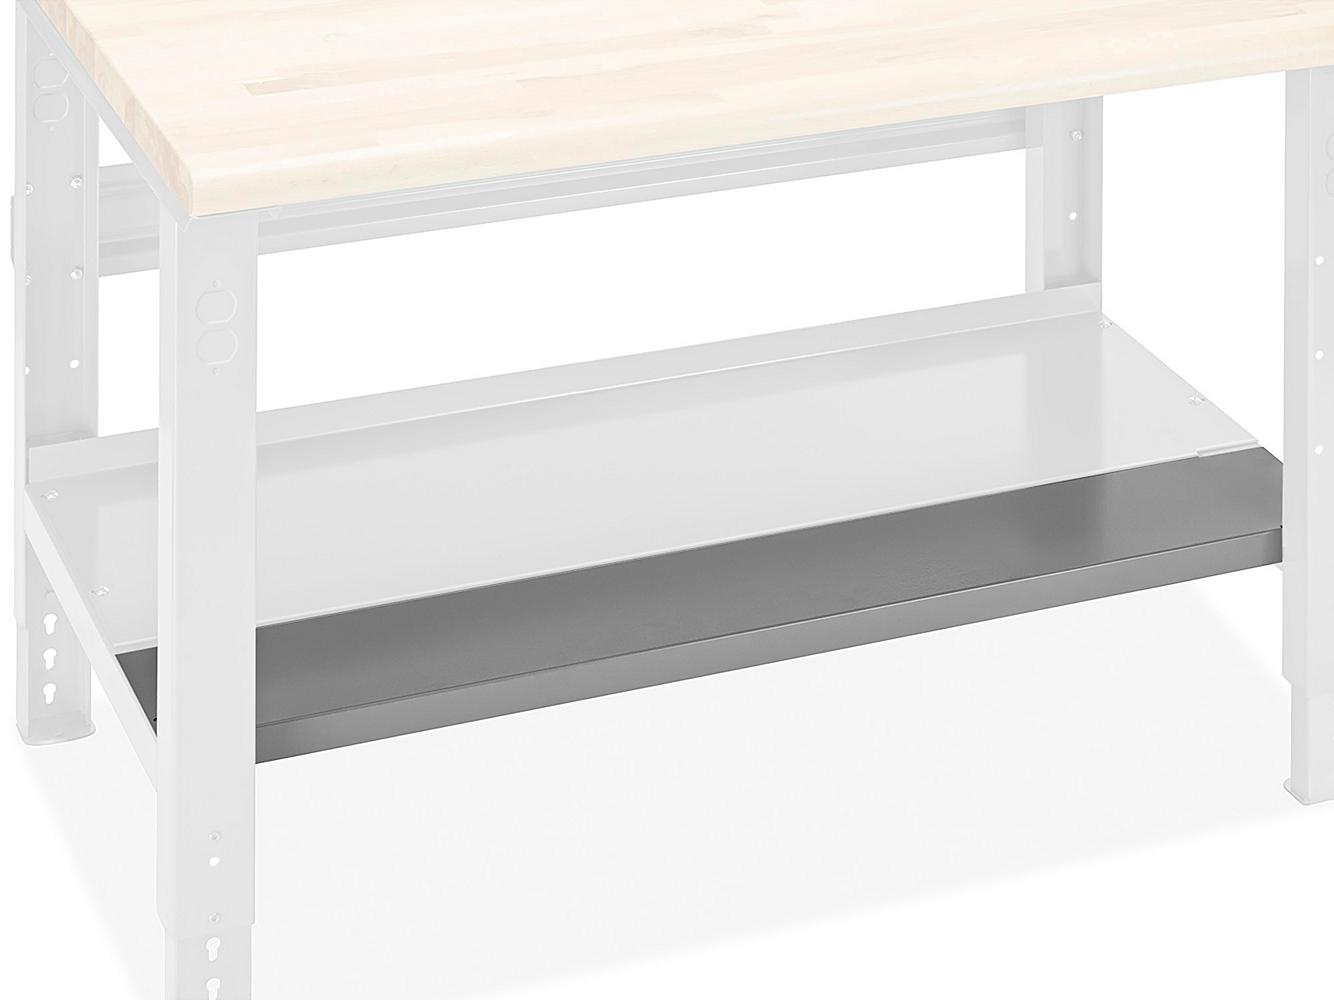 Packing Table Bottom Shelf Extensions in Stock - ULINE